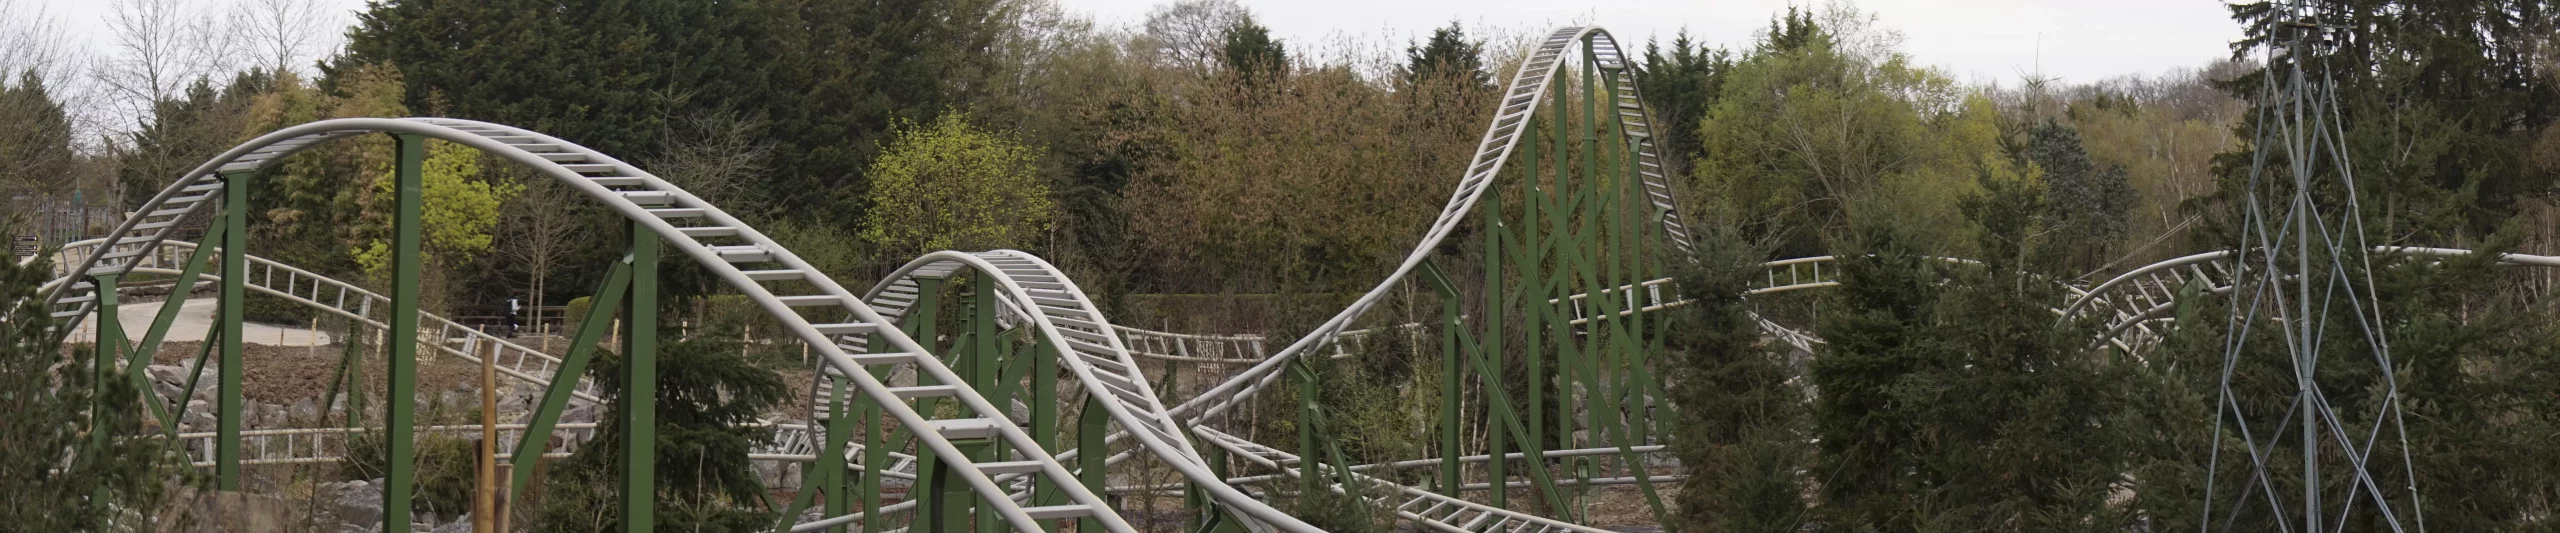 The roller coaster within the zoo